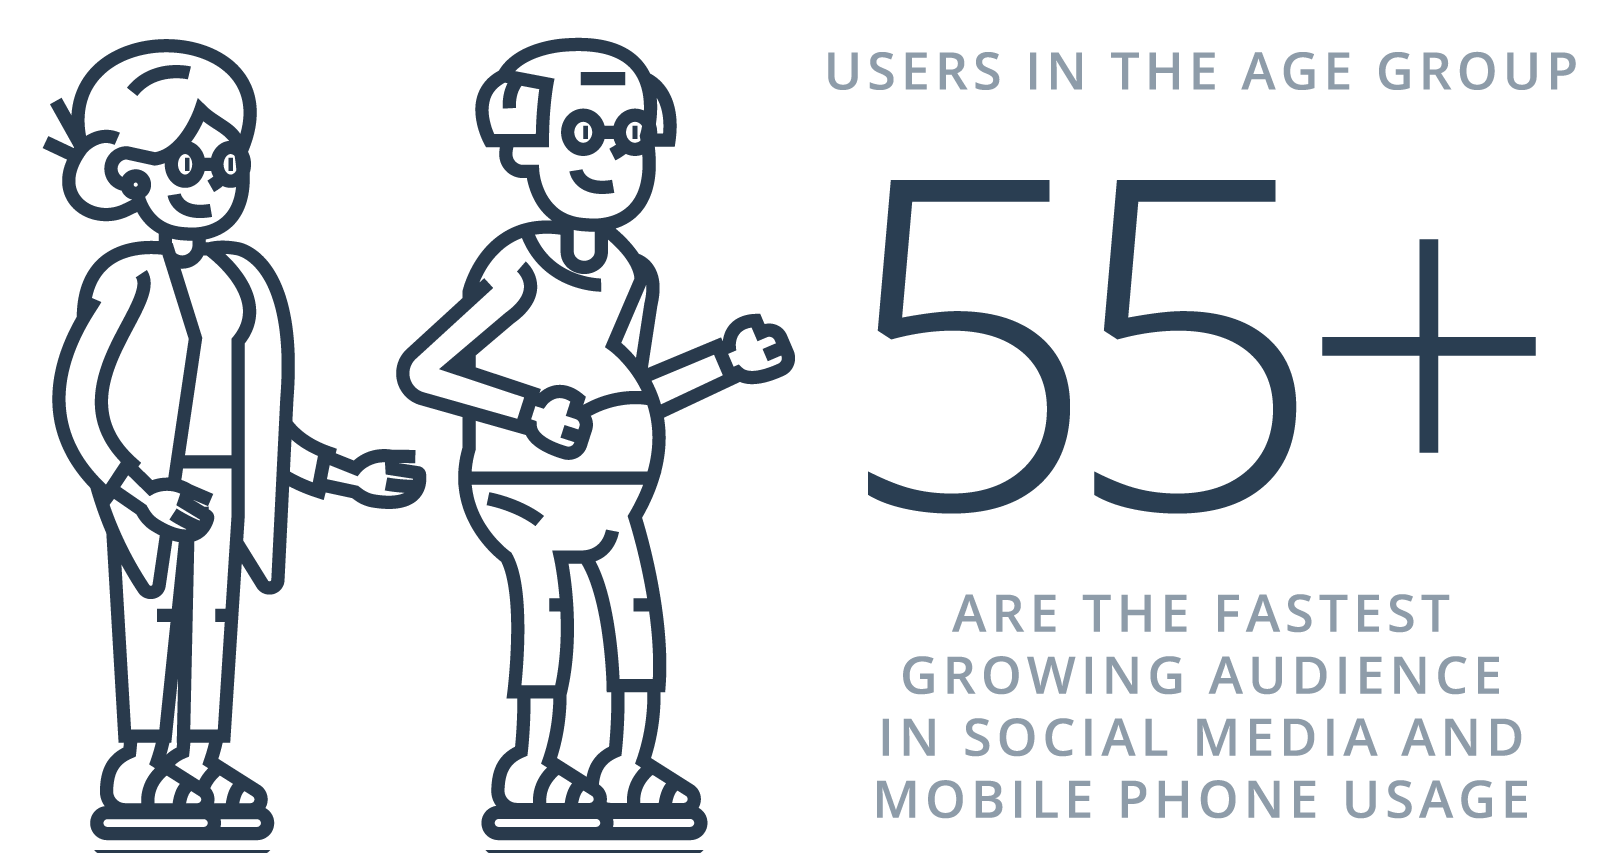 55+ users mobile